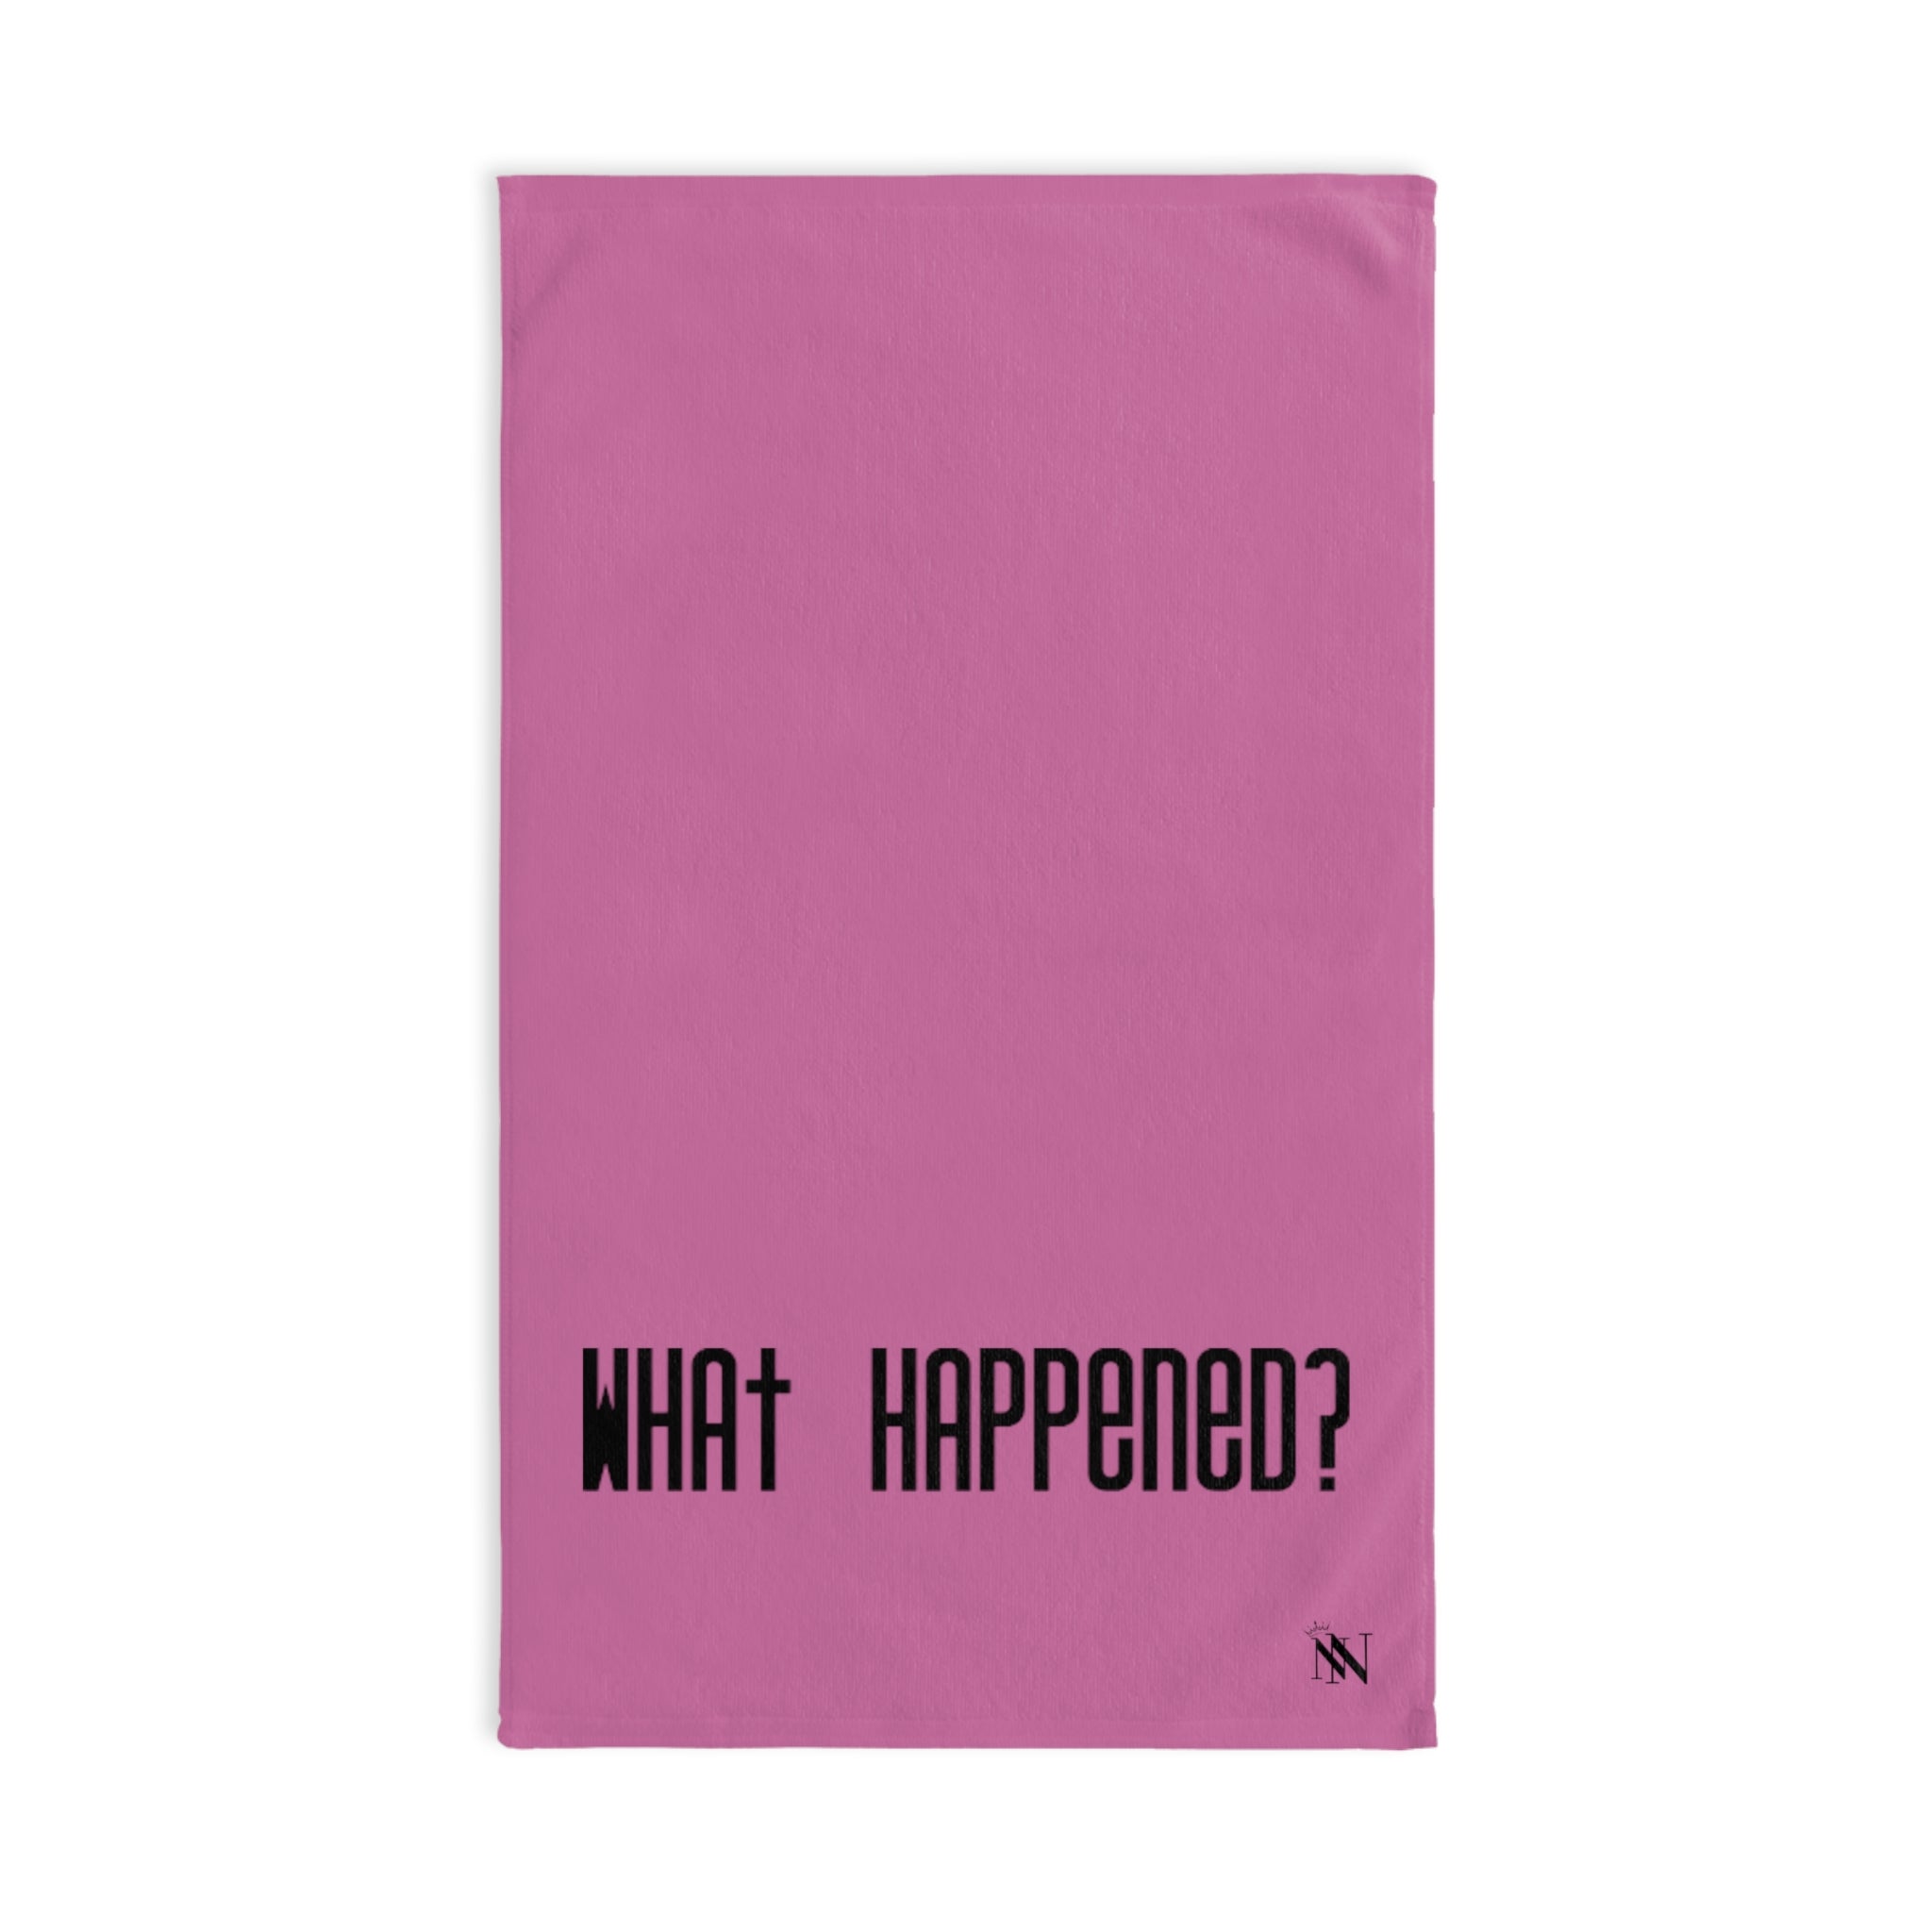 What HappenedPink | Novelty Gifts for Boyfriend, Funny Towel Romantic Gift for Wedding Couple Fiance First Year Anniversary Valentines, Party Gag Gifts, Joke Humor Cloth for Husband Men BF NECTAR NAPKINS